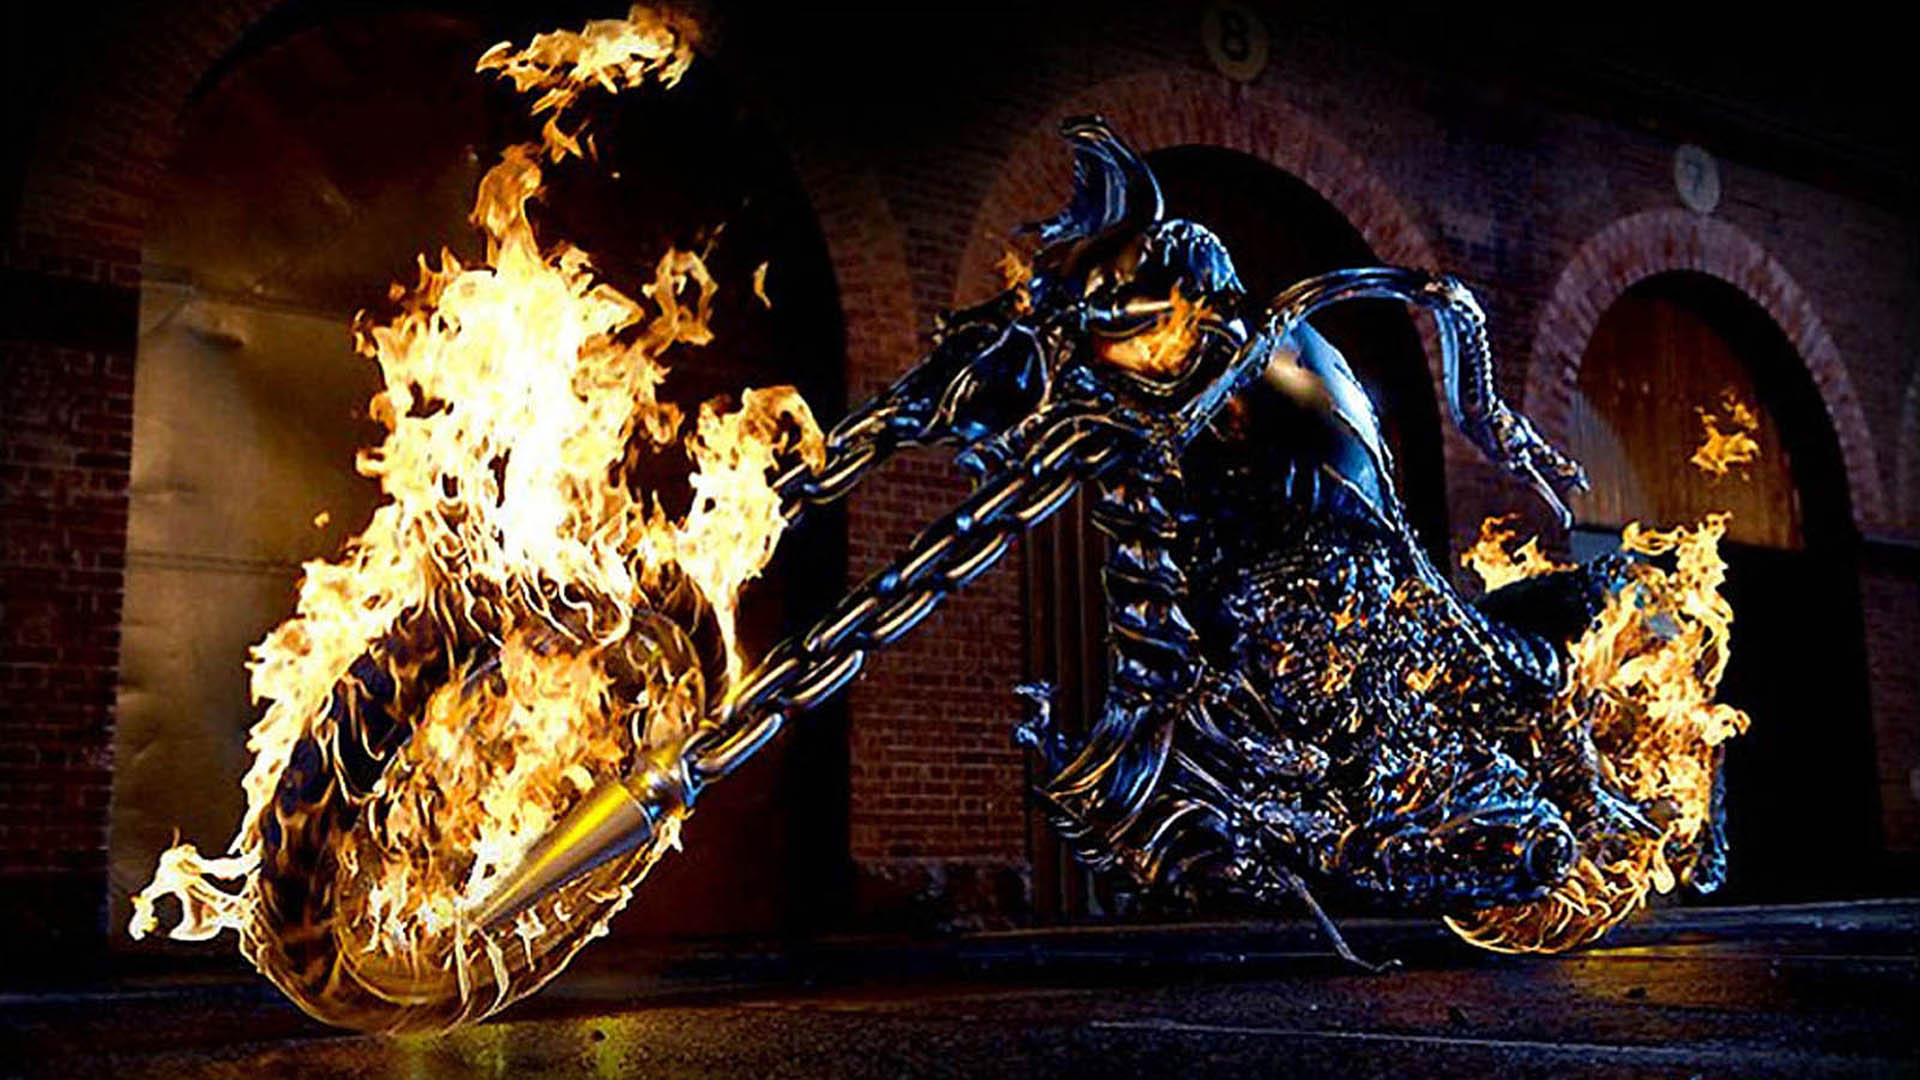 Ghost Rider Wallpaper 1920x1080 Wallpapers 1920x1080